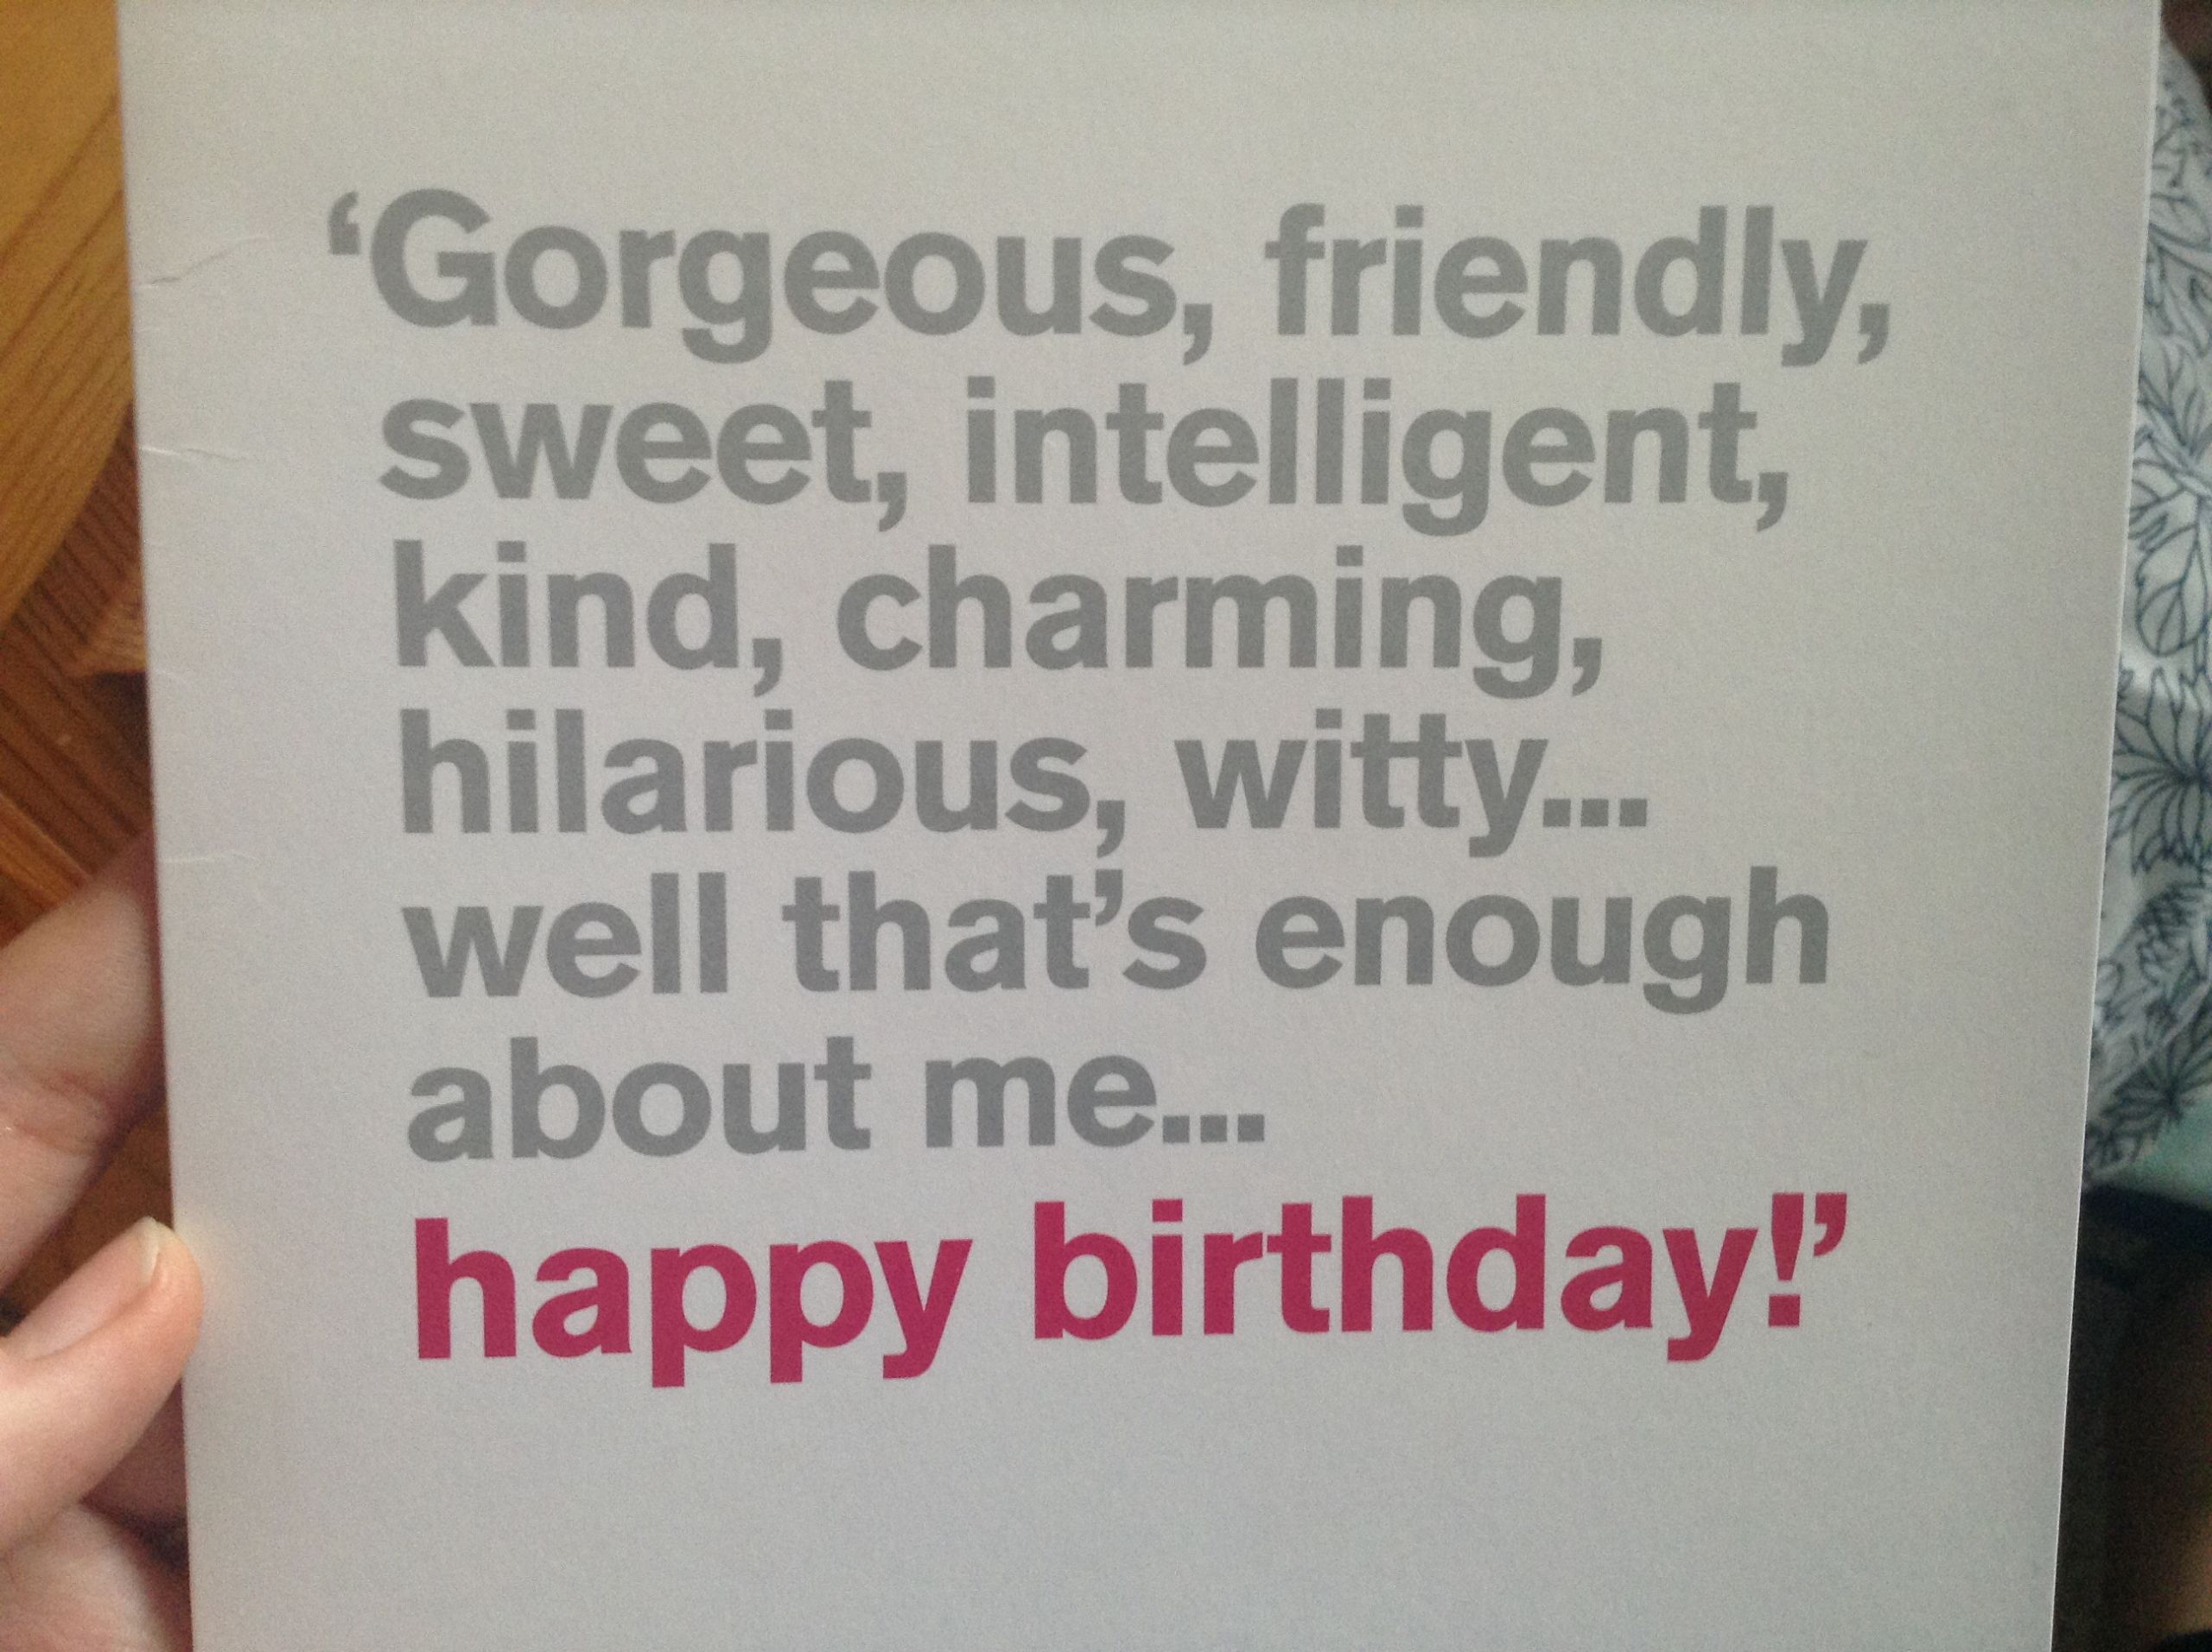 Happy Birthday To Me Quotes Funny
 Funny Birthday Quotes For Husband From Wife QuotesGram